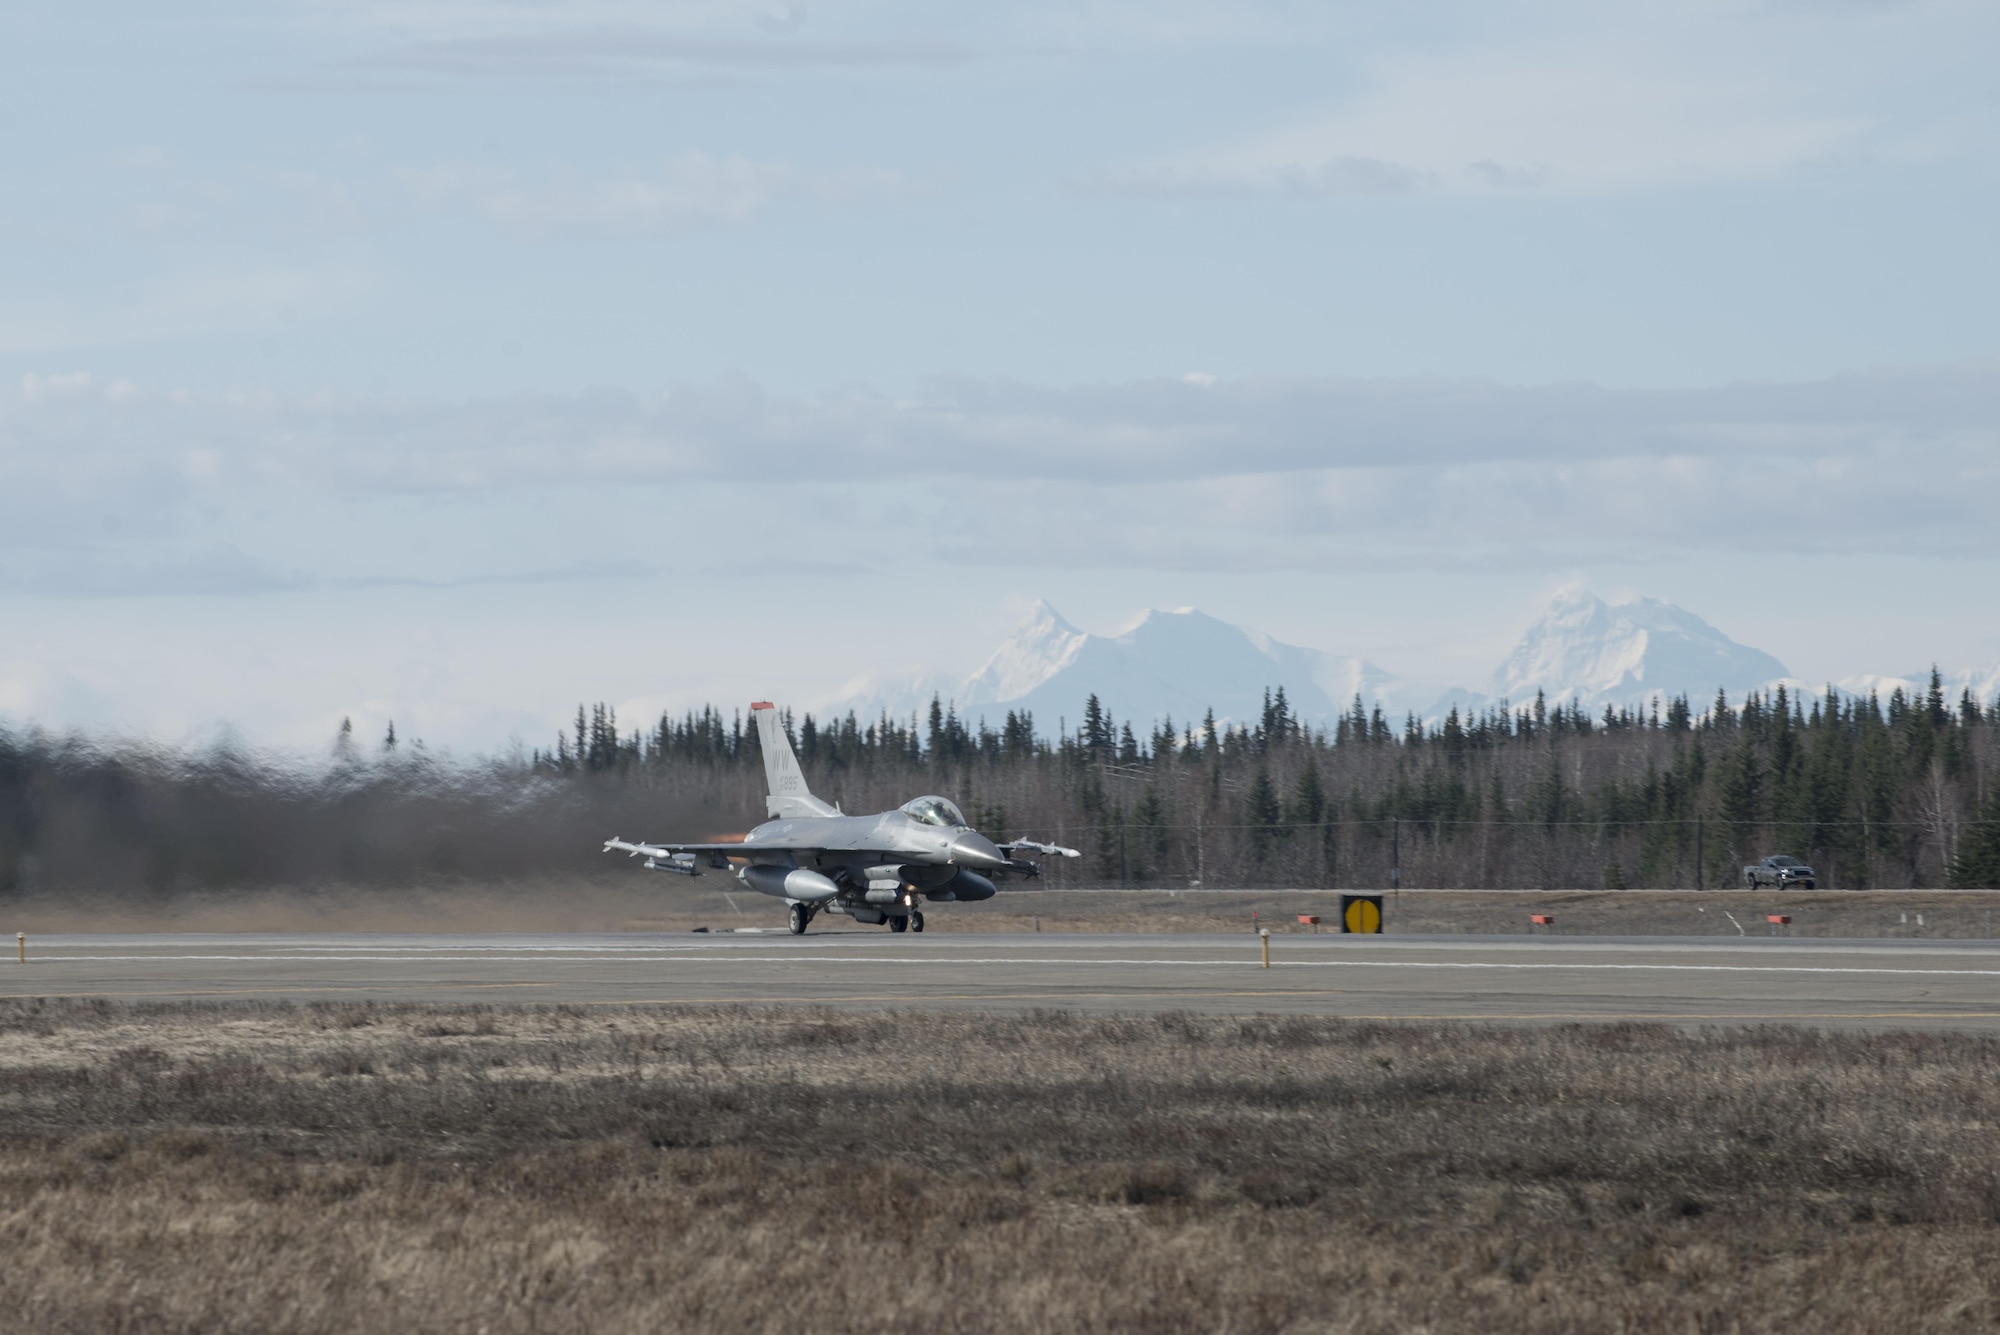 EIELSON AIR FORCE BASE, Alaska – A U.S. Air Force F-16 Fighting Falcon aircraft assigned to the 13th Fighter Squadron, Misawa Air Base, Japan, takes off for a sortie from Eielson Air Force Base, Alaska, May 1, 2017 during NORTHERN EDGE 2017 (NE17). NE17 is Alaska’s premier joint training exercise designed to practice operations, techniques and procedures as well as enhance interoperability among the services. Thousands of participants from all the services, Airmen, Soldiers, Sailors, Marines and Coast Guardsmen from active duty, Reserve and National Guard units are involved. (U.S. Air Force photo/Staff Sgt. Ashley Nicole Taylor)